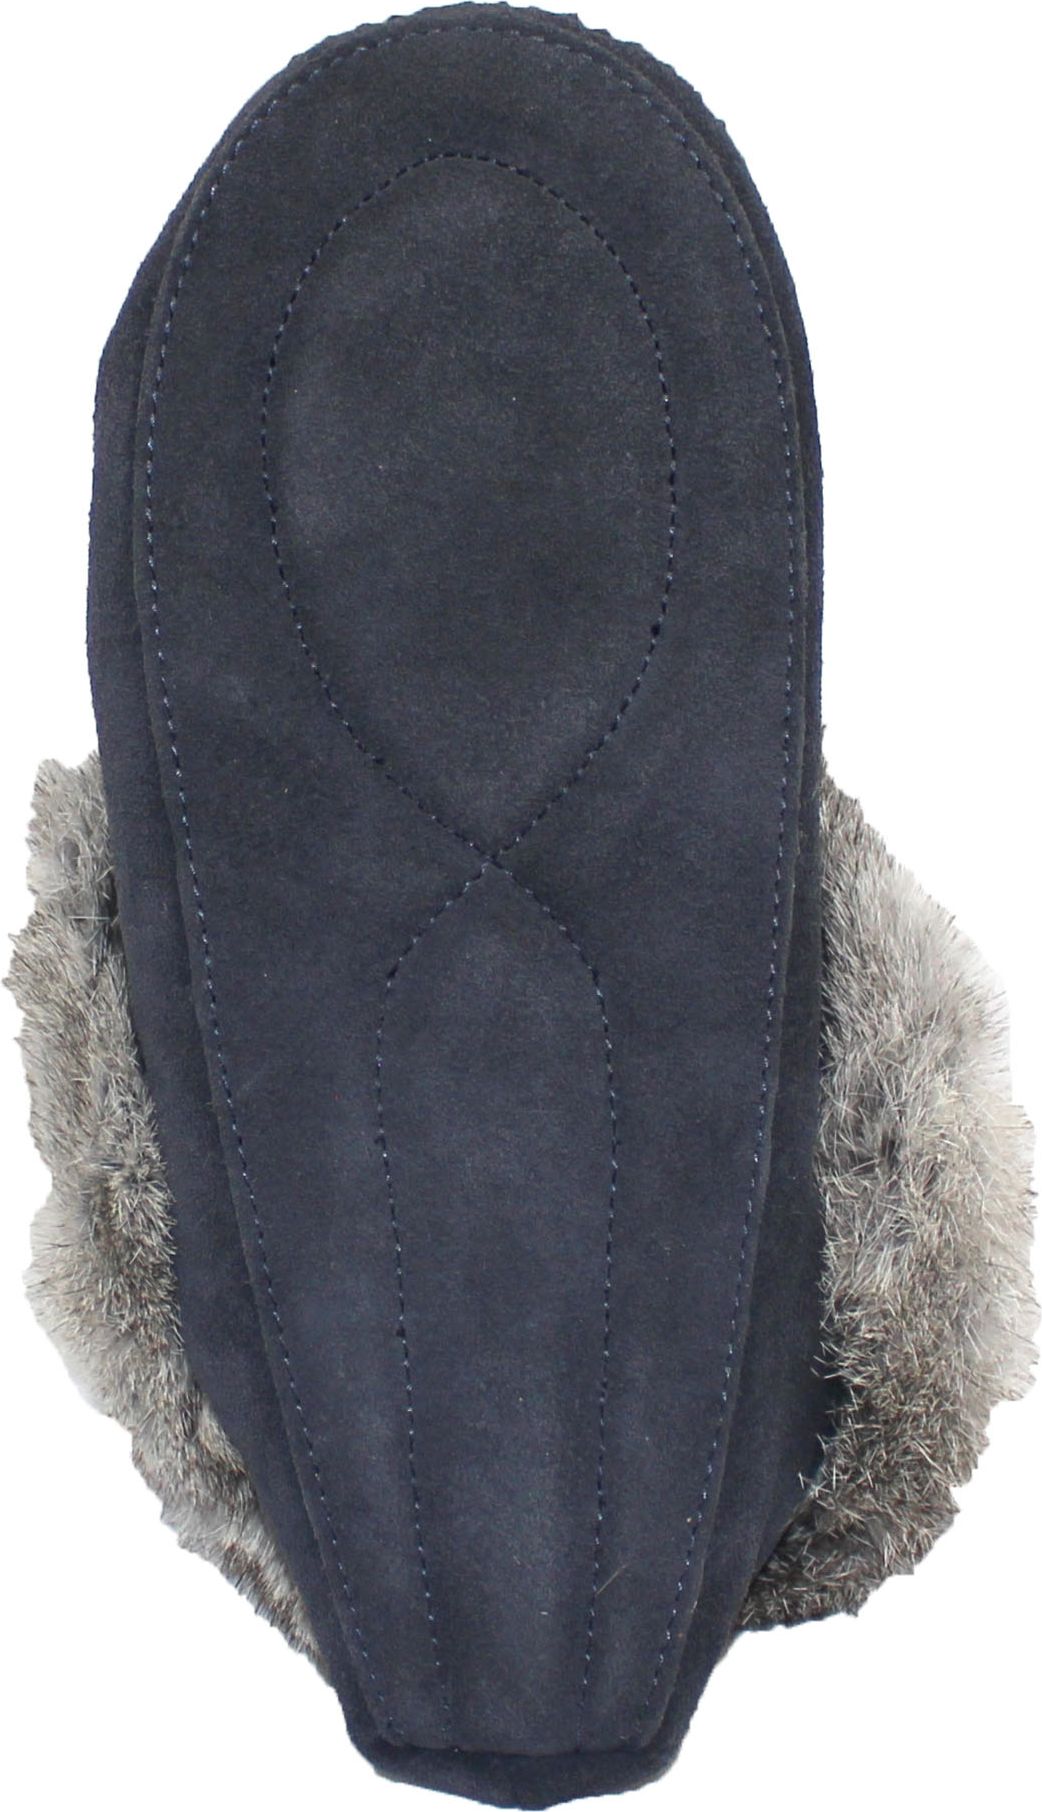 Urban Trail Slippers Beaded Mocc With Fur Trim Navy